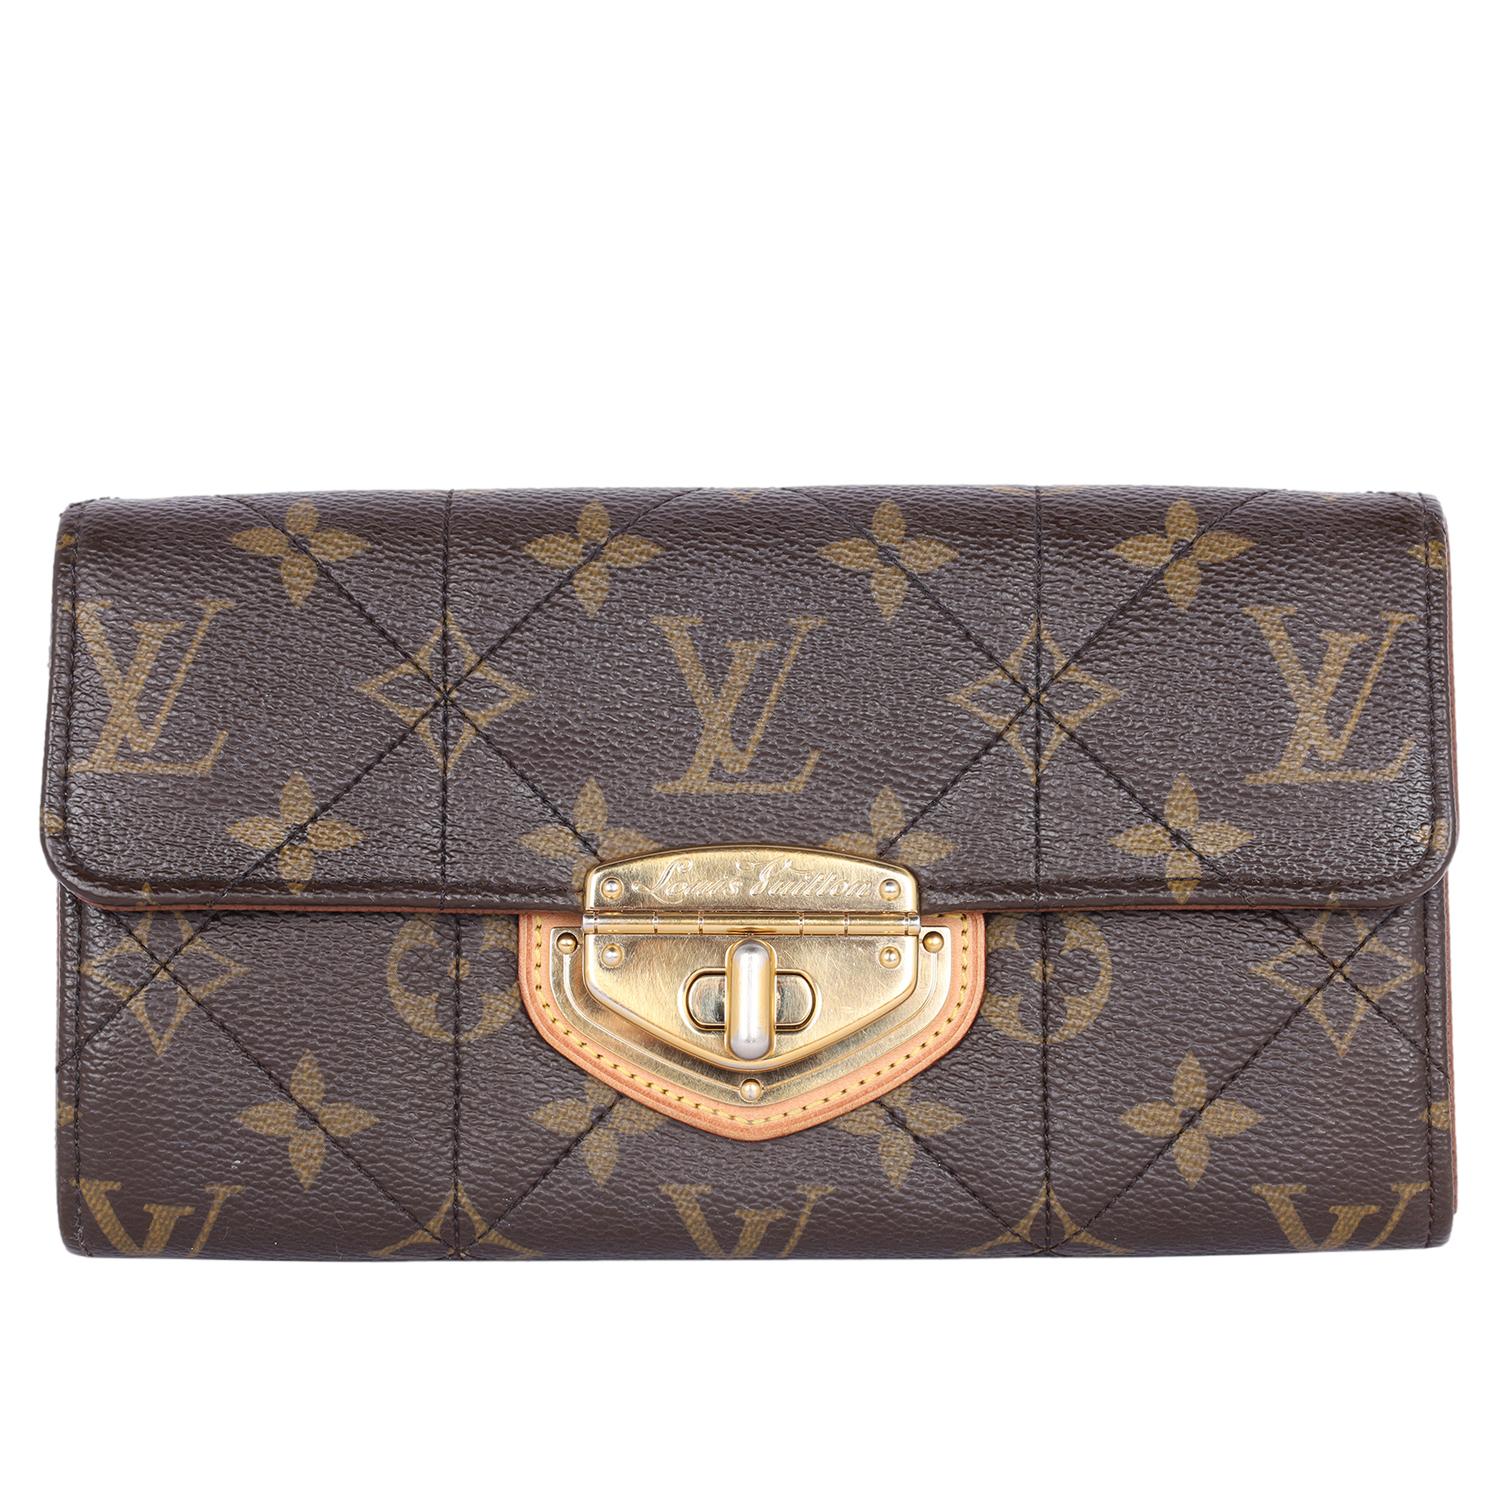 Authentic, pre-loved Louis Vuitton monogram canvas Etoile Sarah wallet. Features soft quilted Louis Vuitton monogram toile canvas with natural vachetta leather trim, front flap turn lock twist closure with engraved Louis Vuitton signature, the